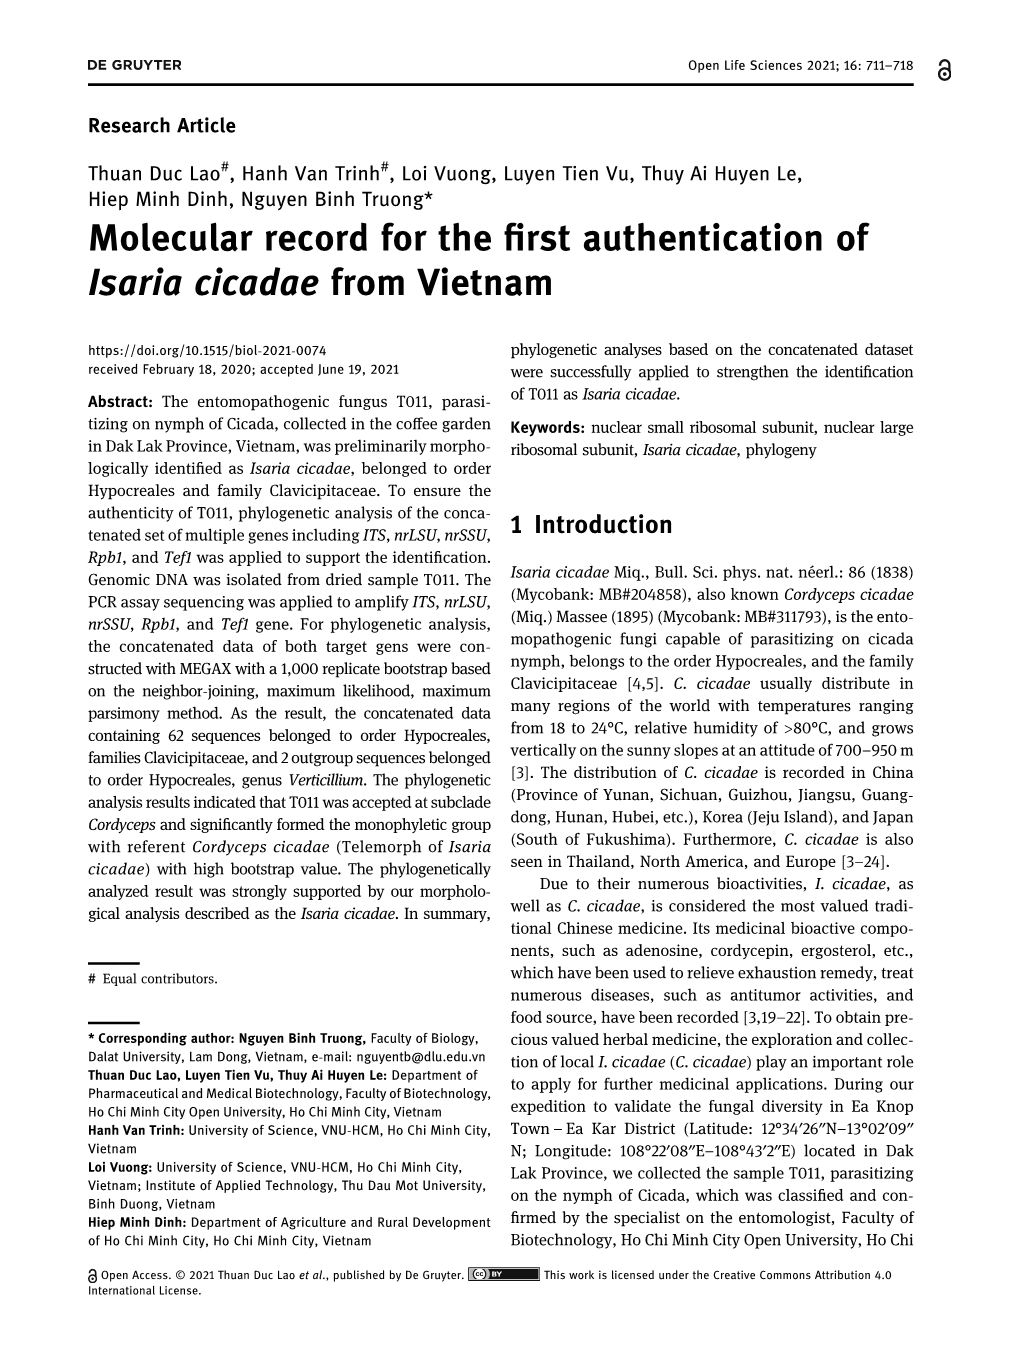 Molecular Record for the First Authentication of Isaria Cicadae